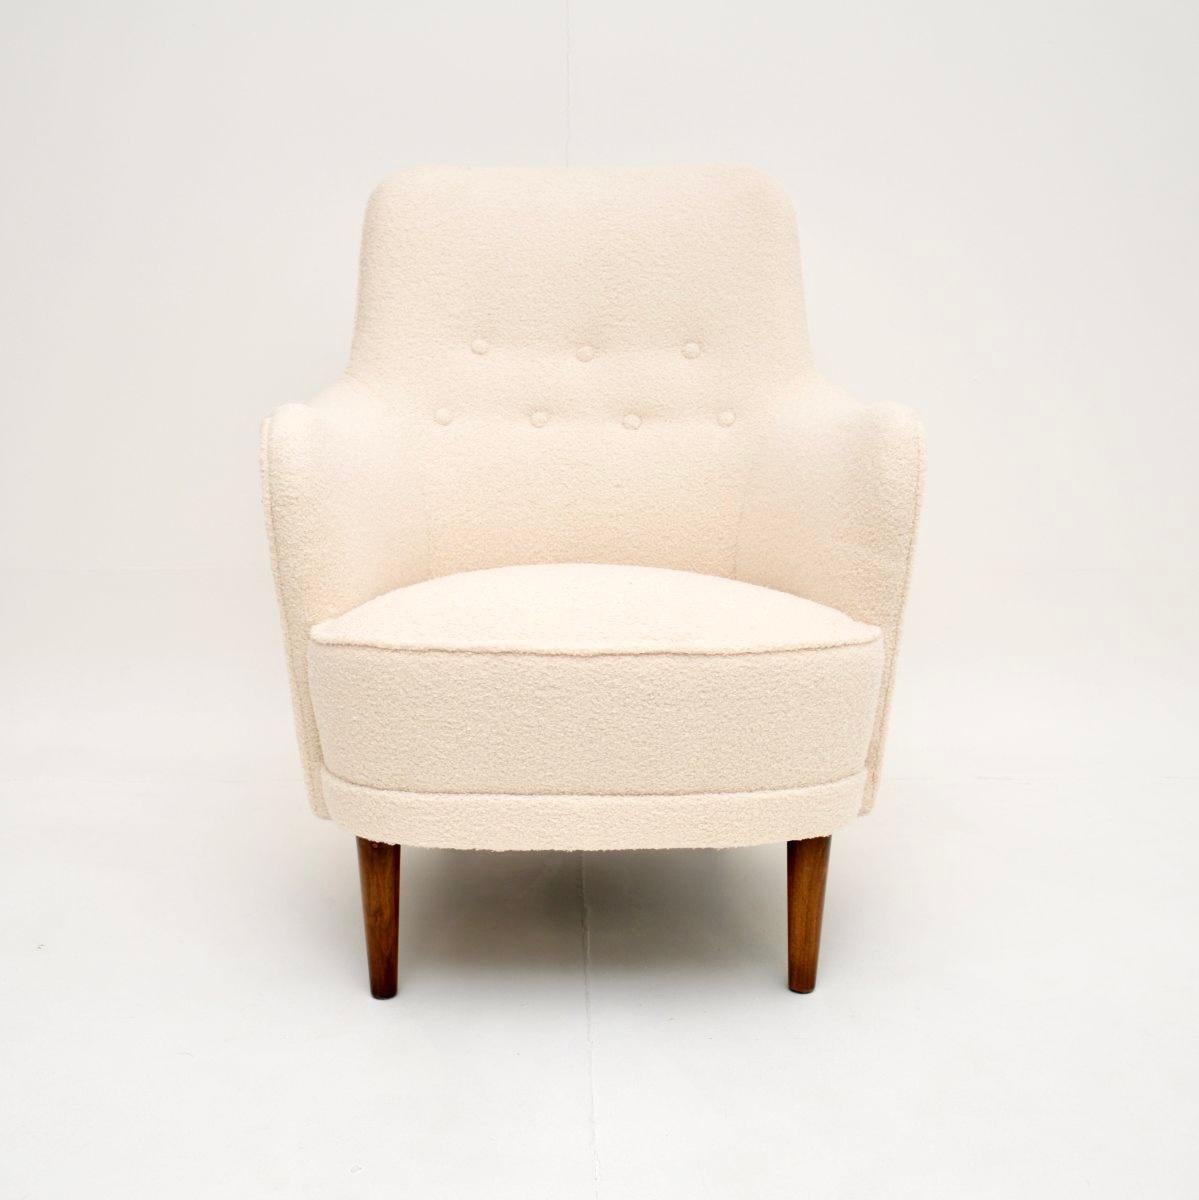 A stylish and iconic vintage Swedish Samsas armchair by Carl Malmsten. It was made in Sweden, it dates from around the 1960’s.

This is of exceptional quality and is extremely comfortable. It is sturdy and supportive, the sweeping curves make it